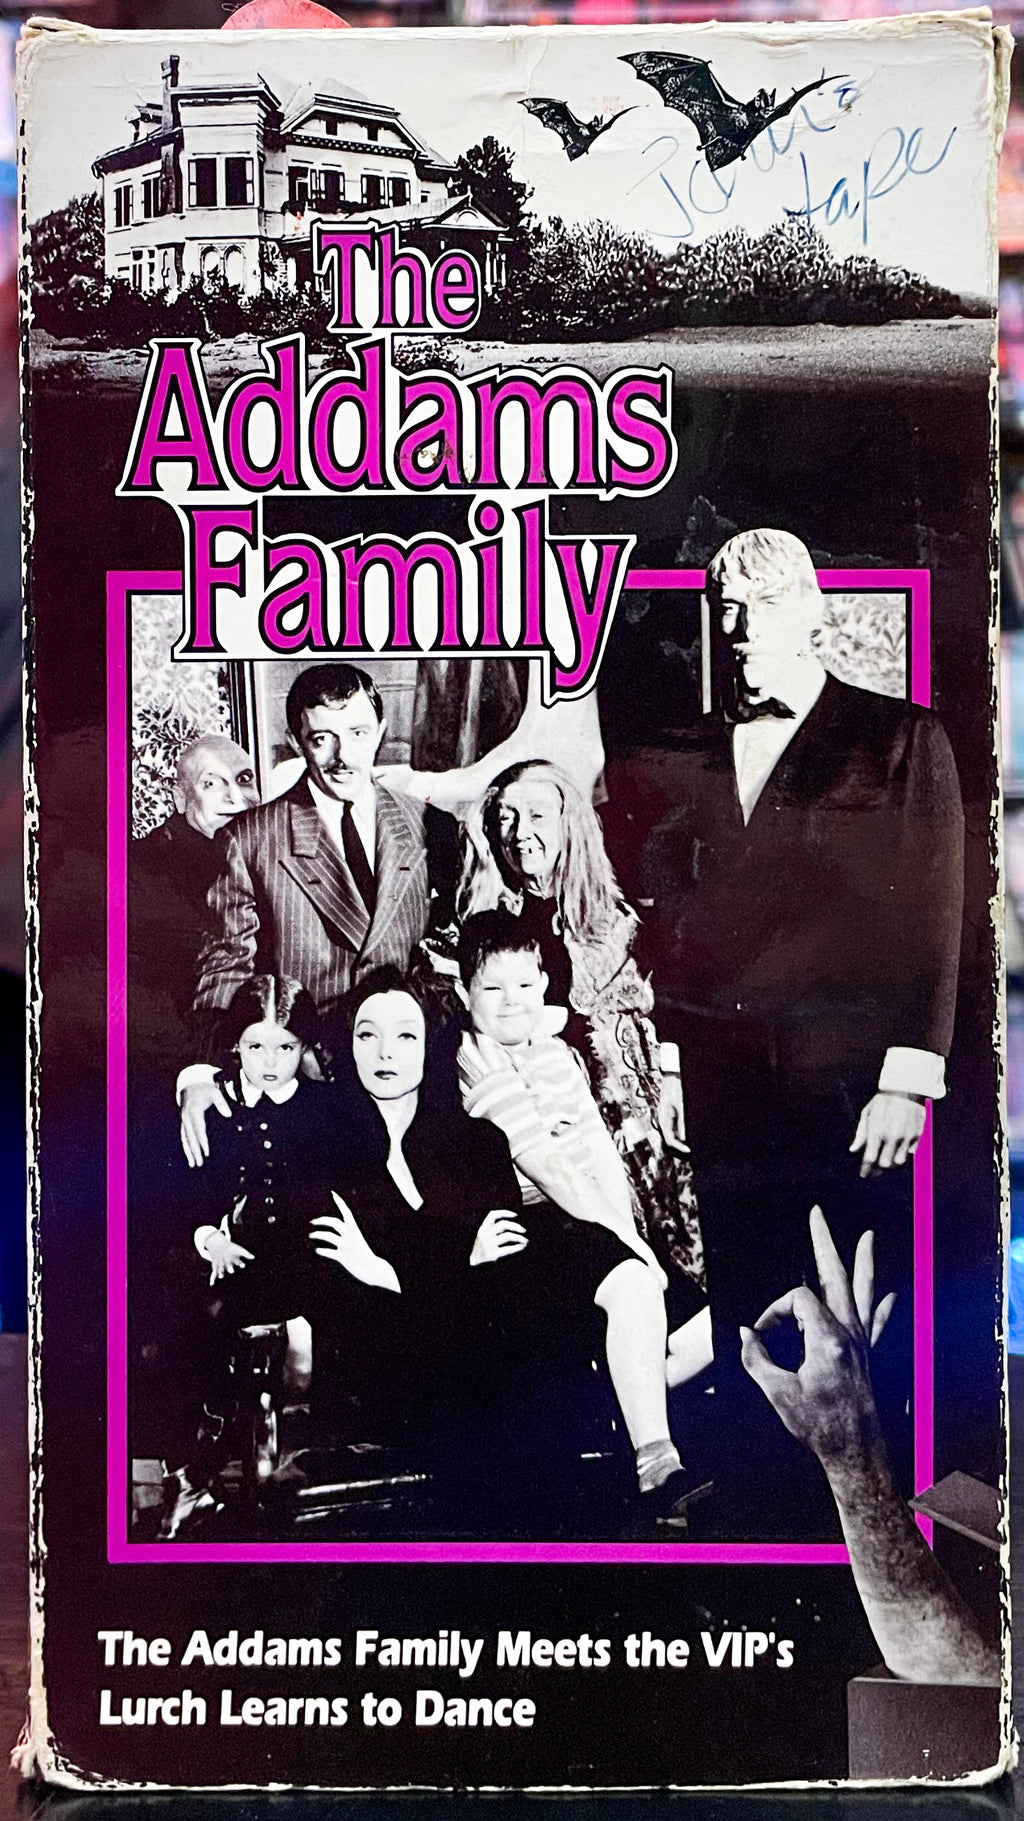 The Addams Family: The Addams Family Meets The VIP’s, Lurch Learns To Dance